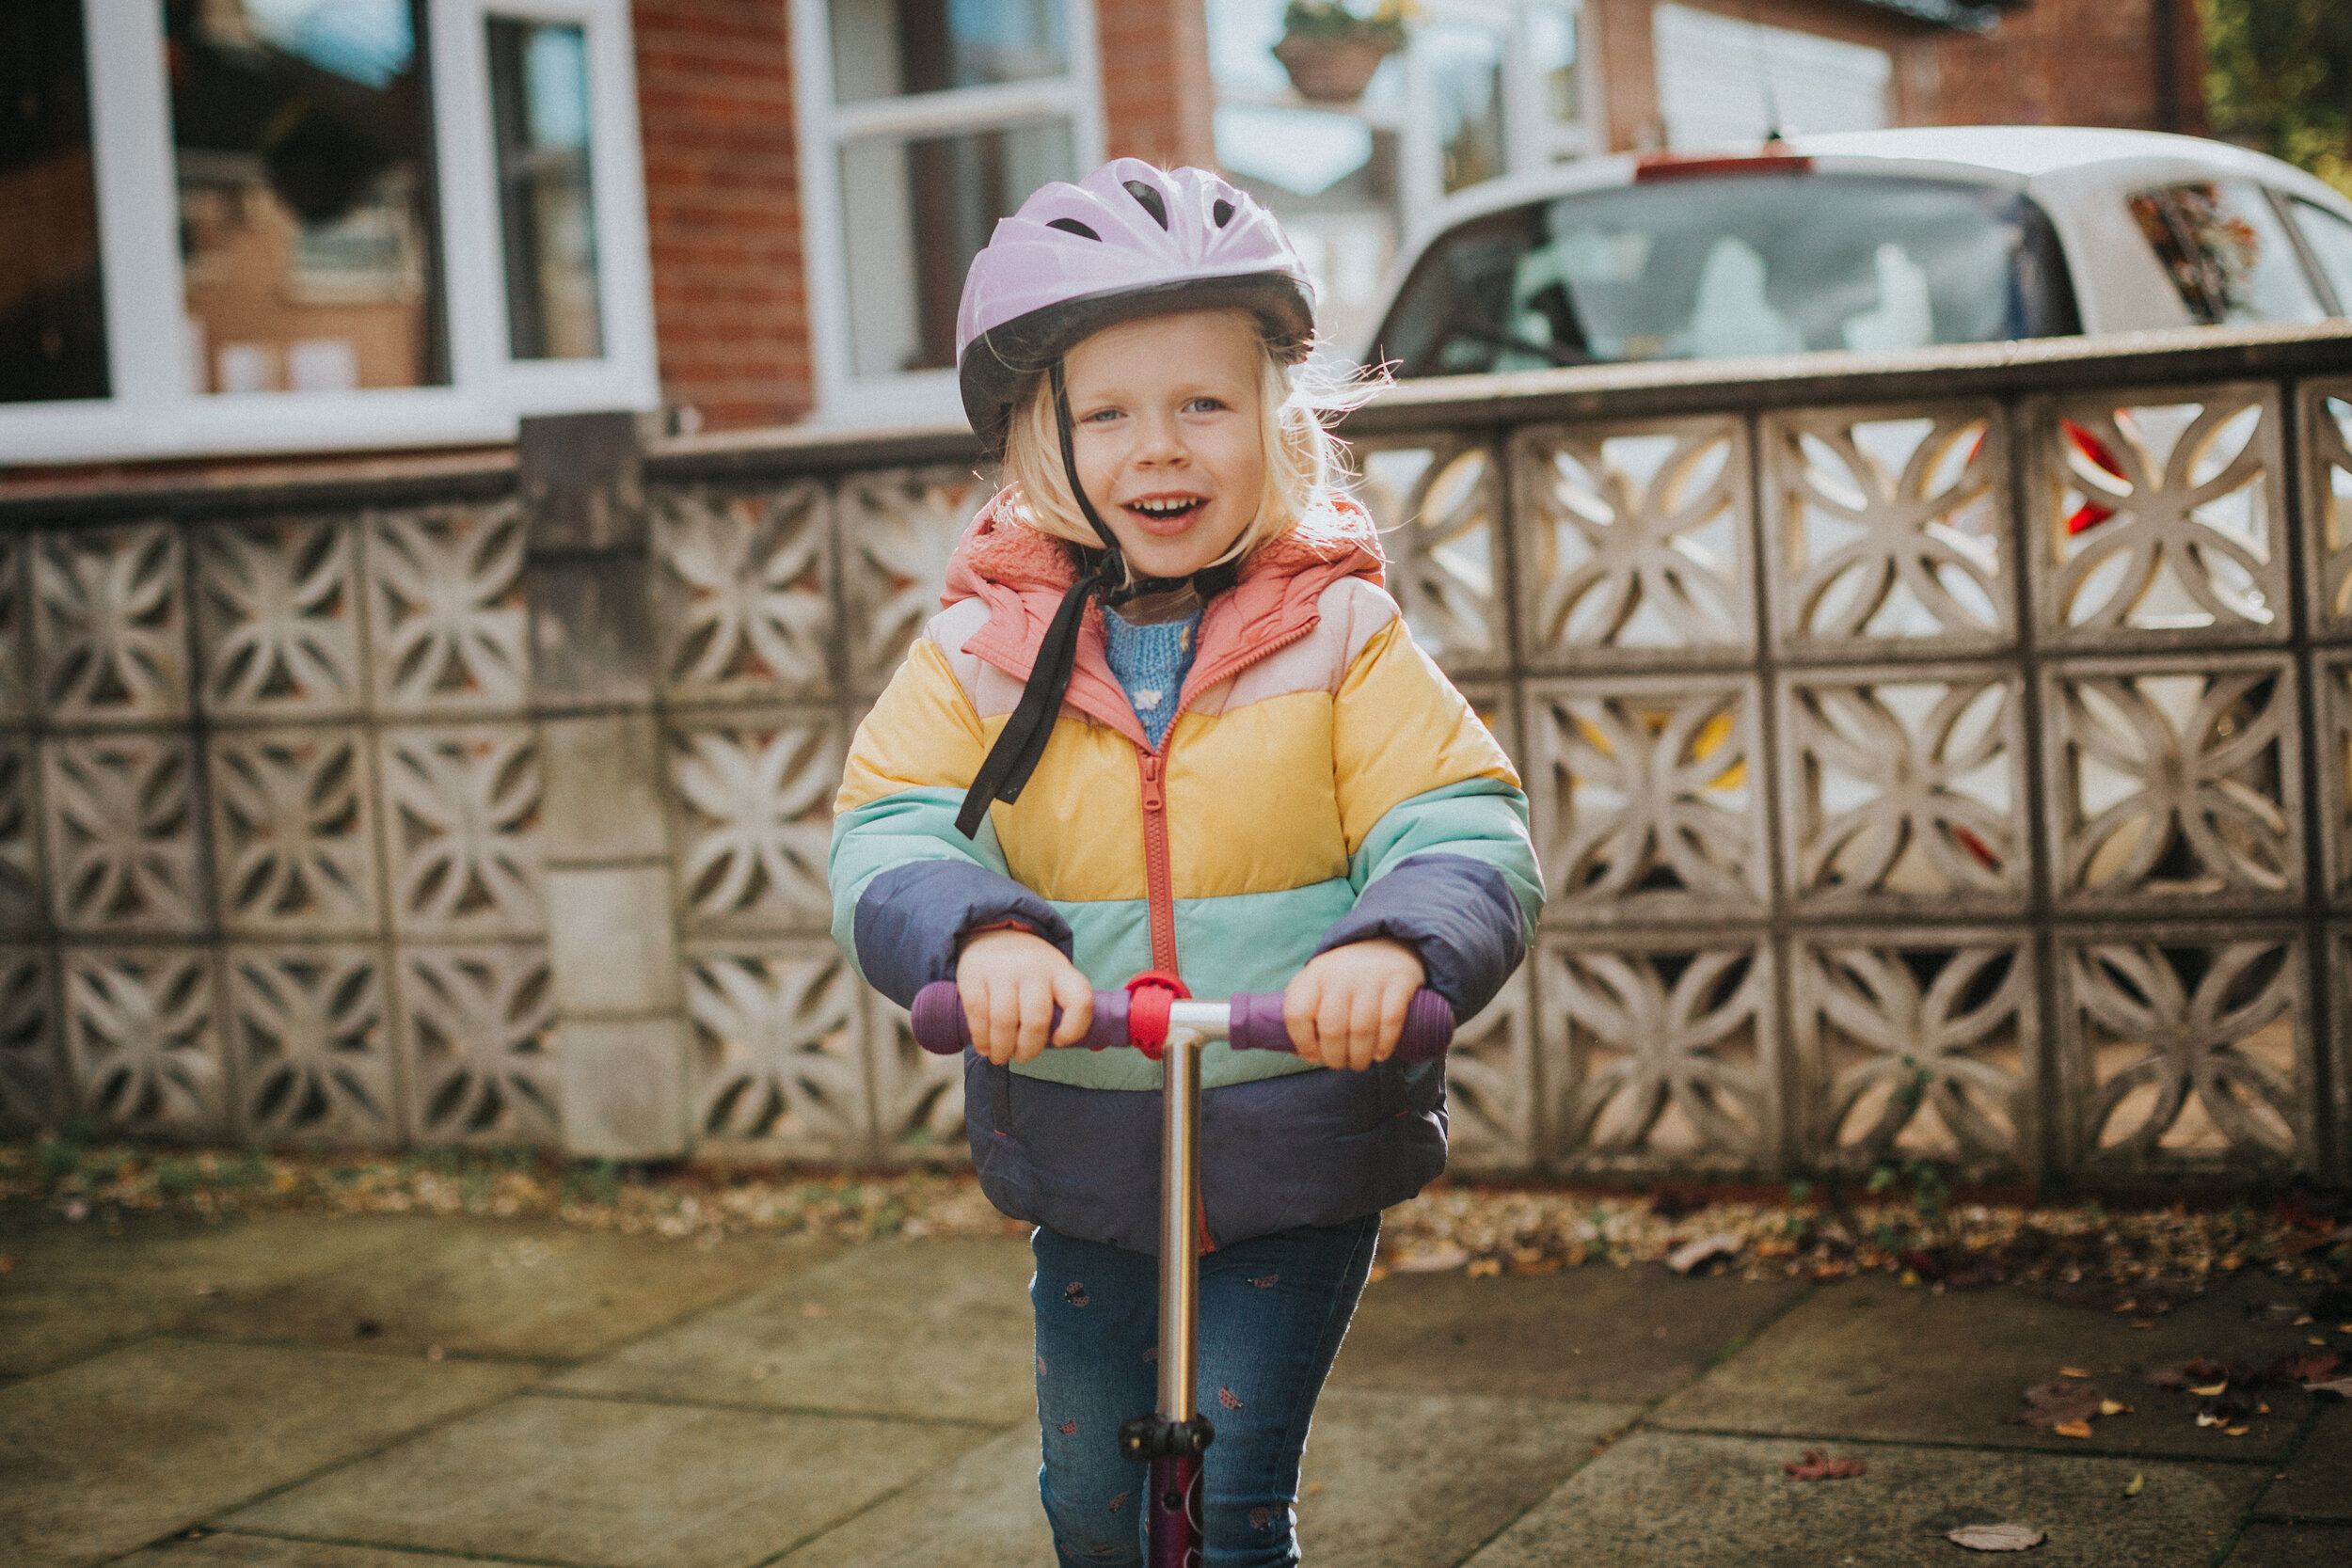 Little girl rides scooter with her purple crash helmet on and colourful coat. 